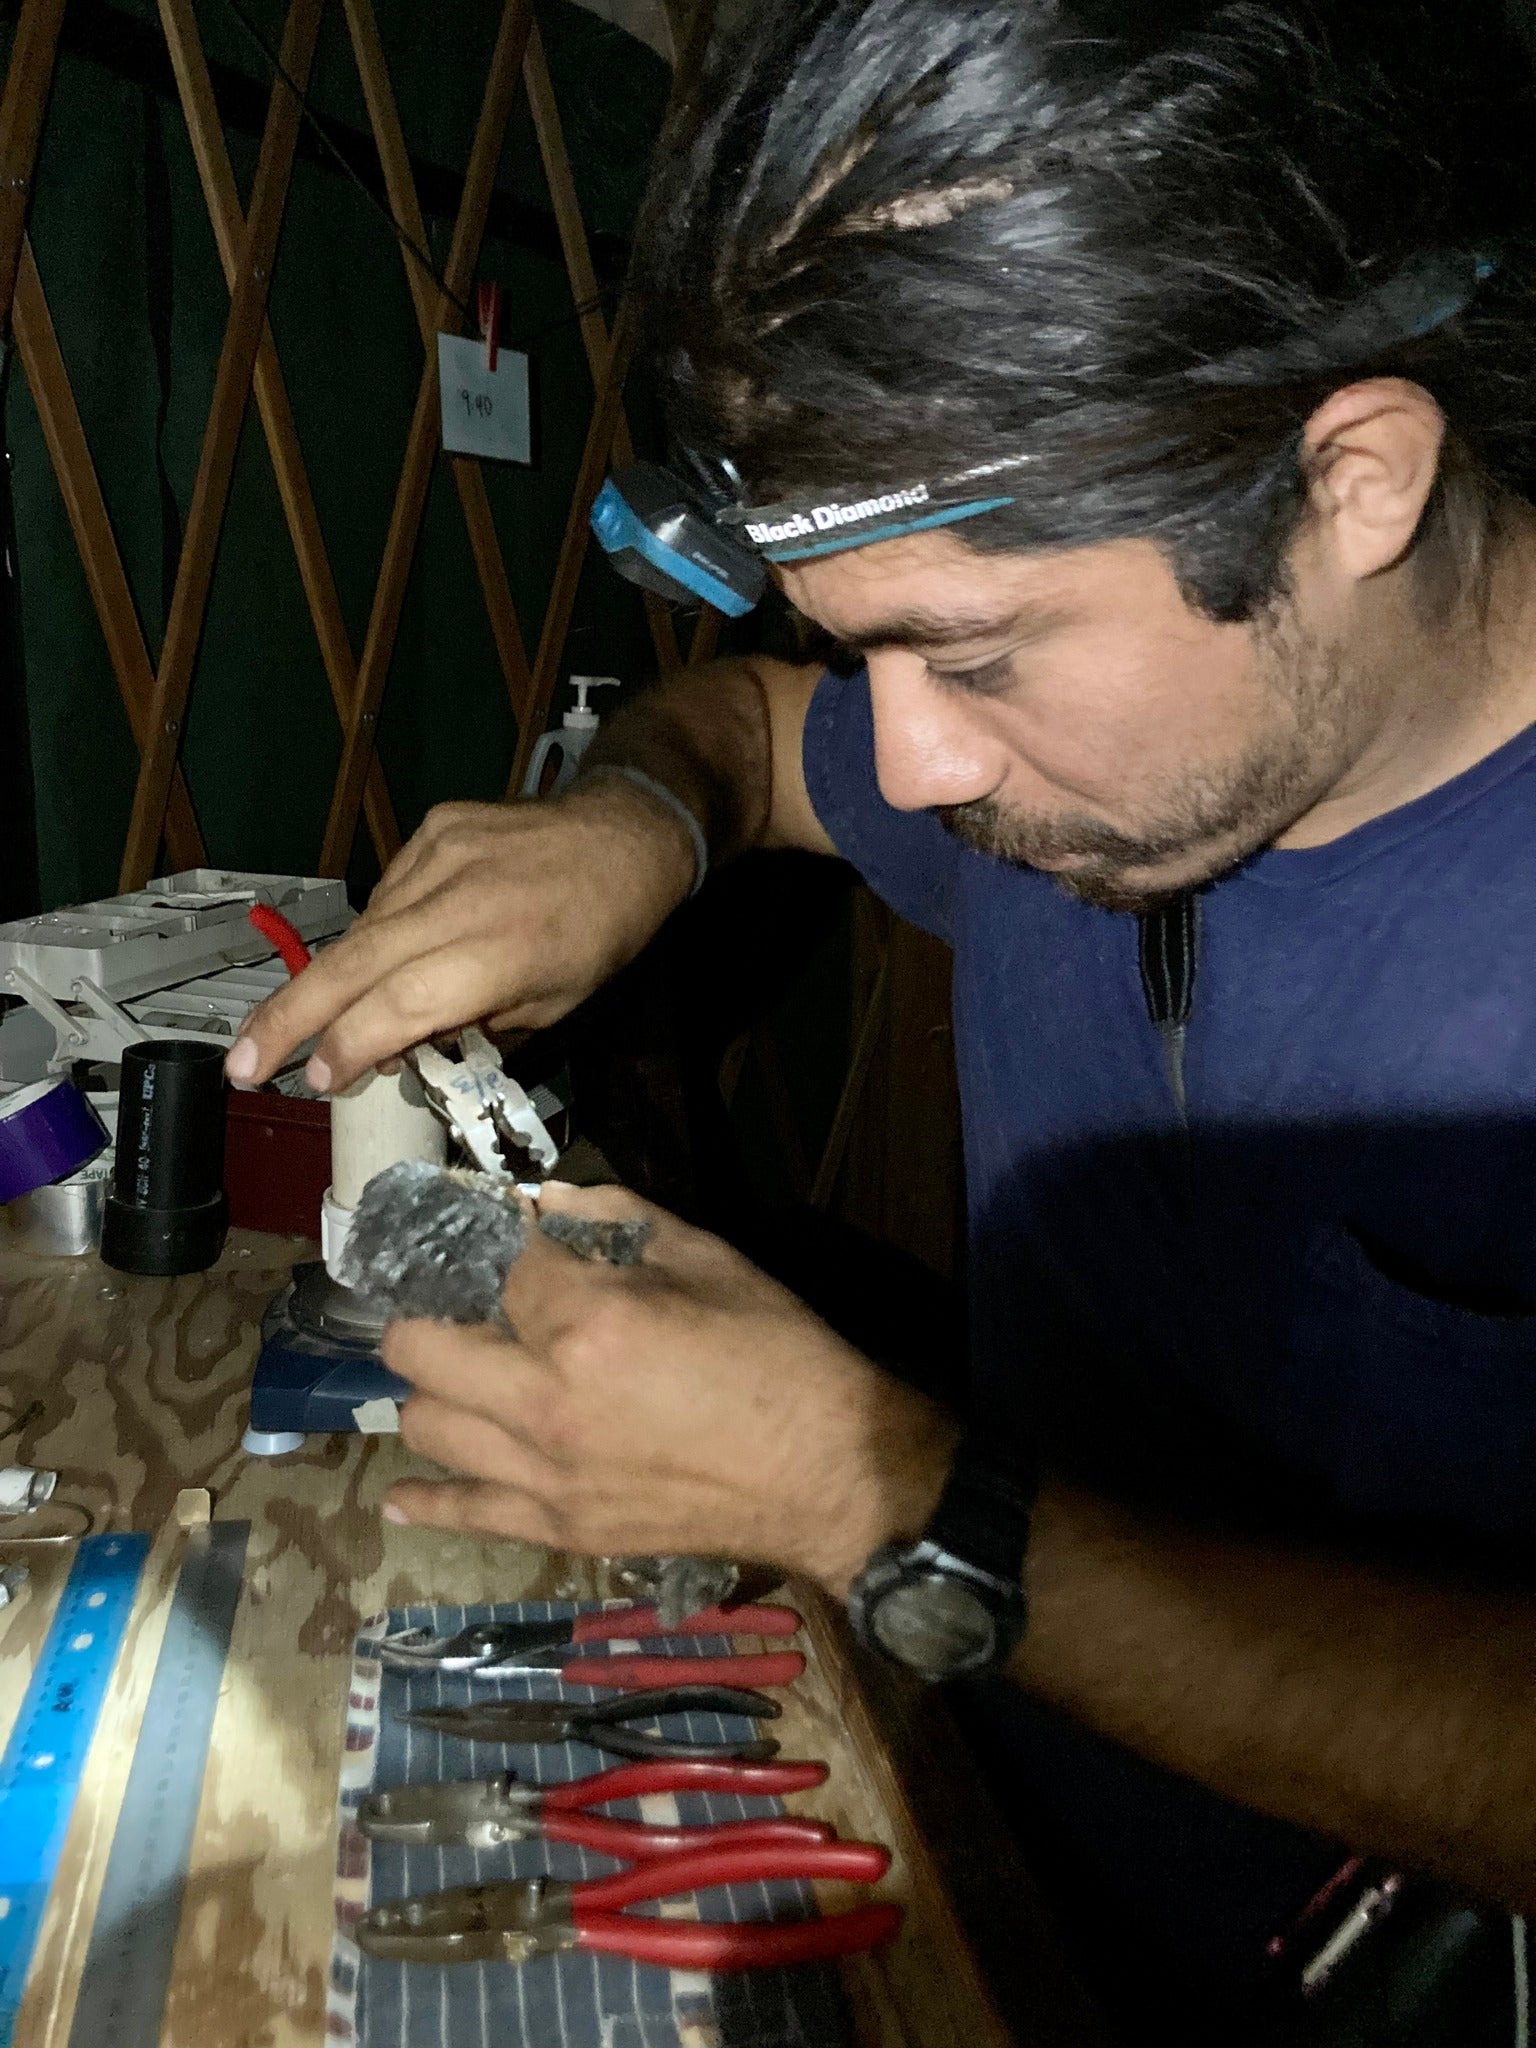 image shows a scientist wearing a headlamp holding a small brown bird in the left hand while using a pair of banding pliers in the right